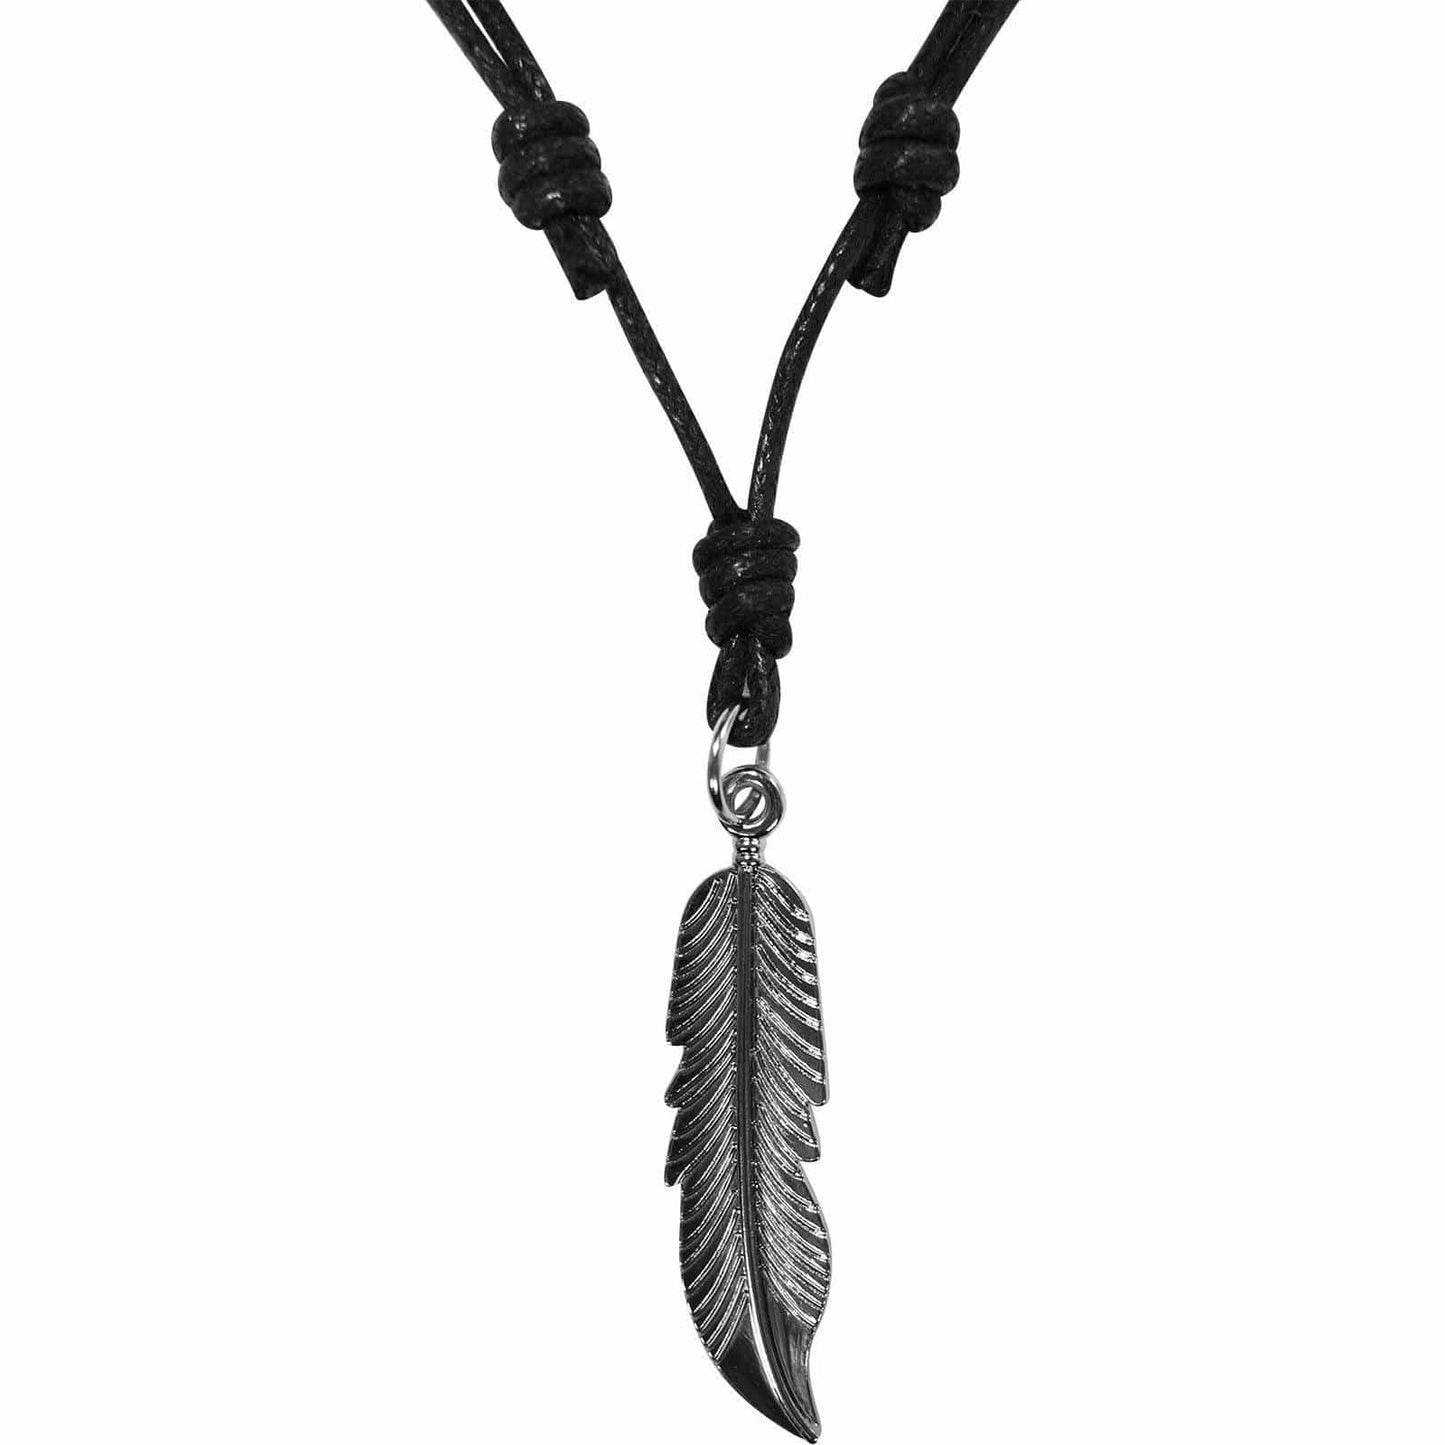 Feather Pendant Chain Necklace Mens Womens Girls Boys Childrens Ladies Jewellery